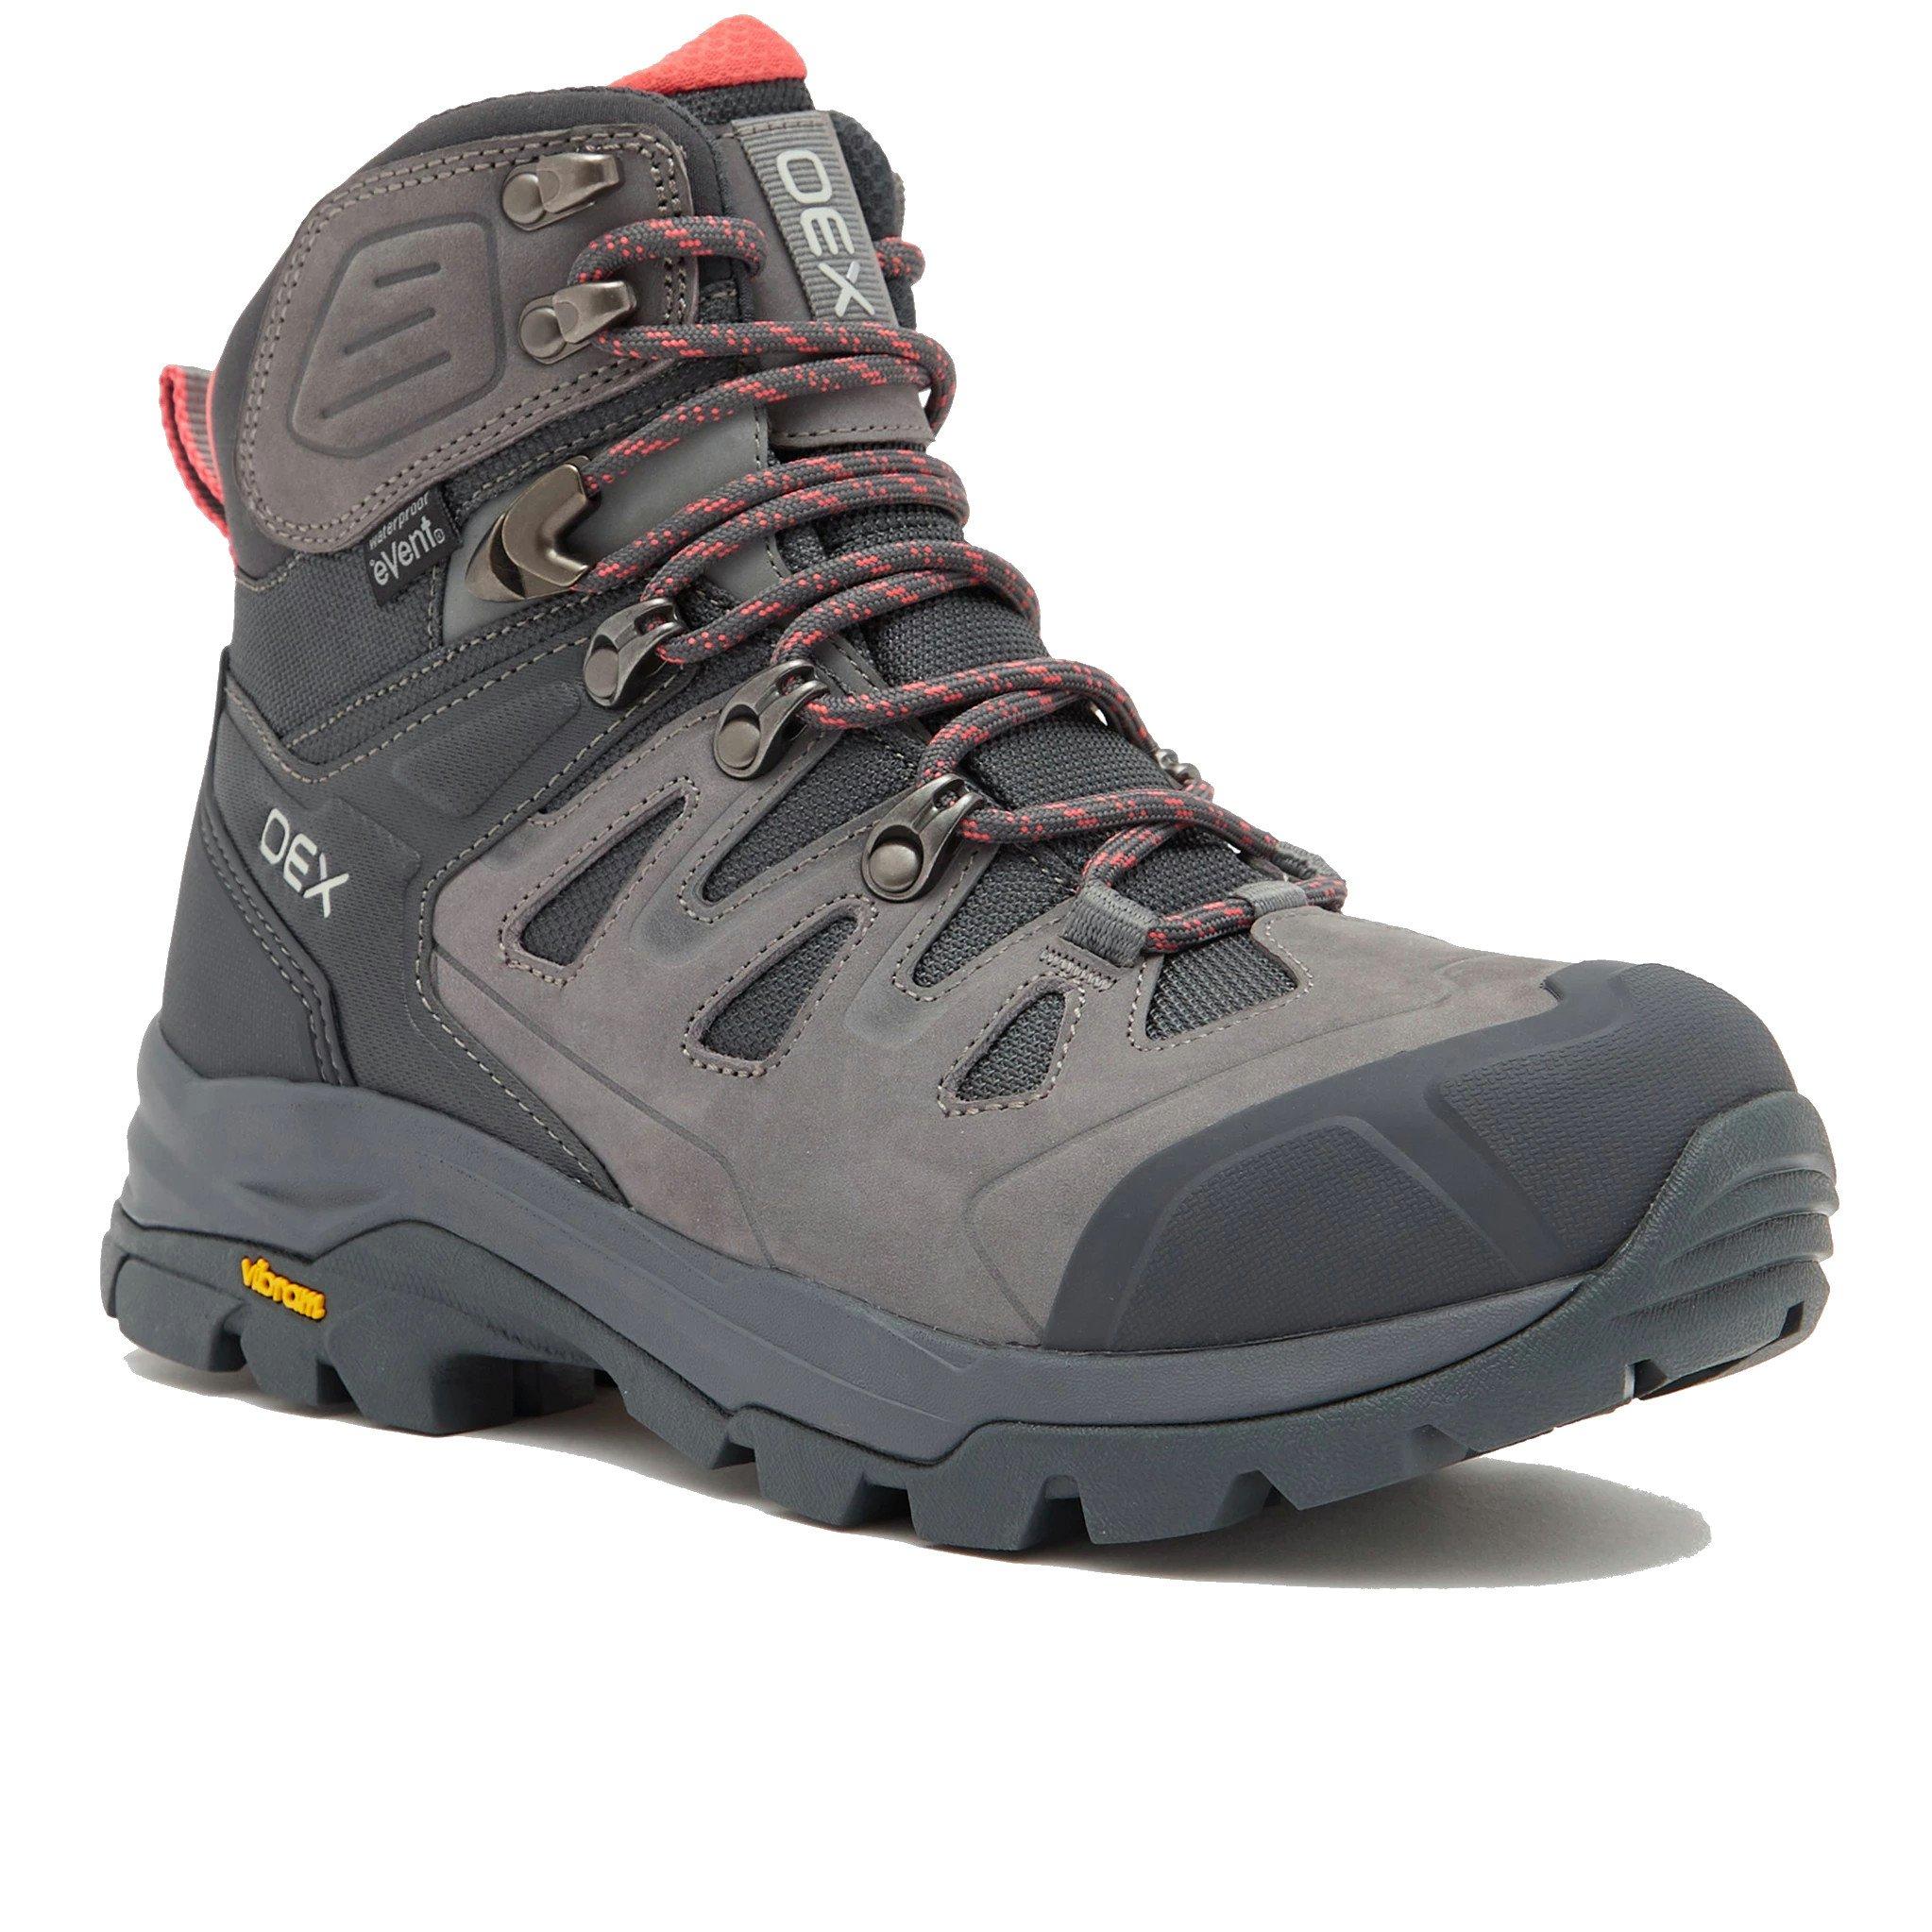 Women's Walking Boots | George Fisher UK | George Fisher